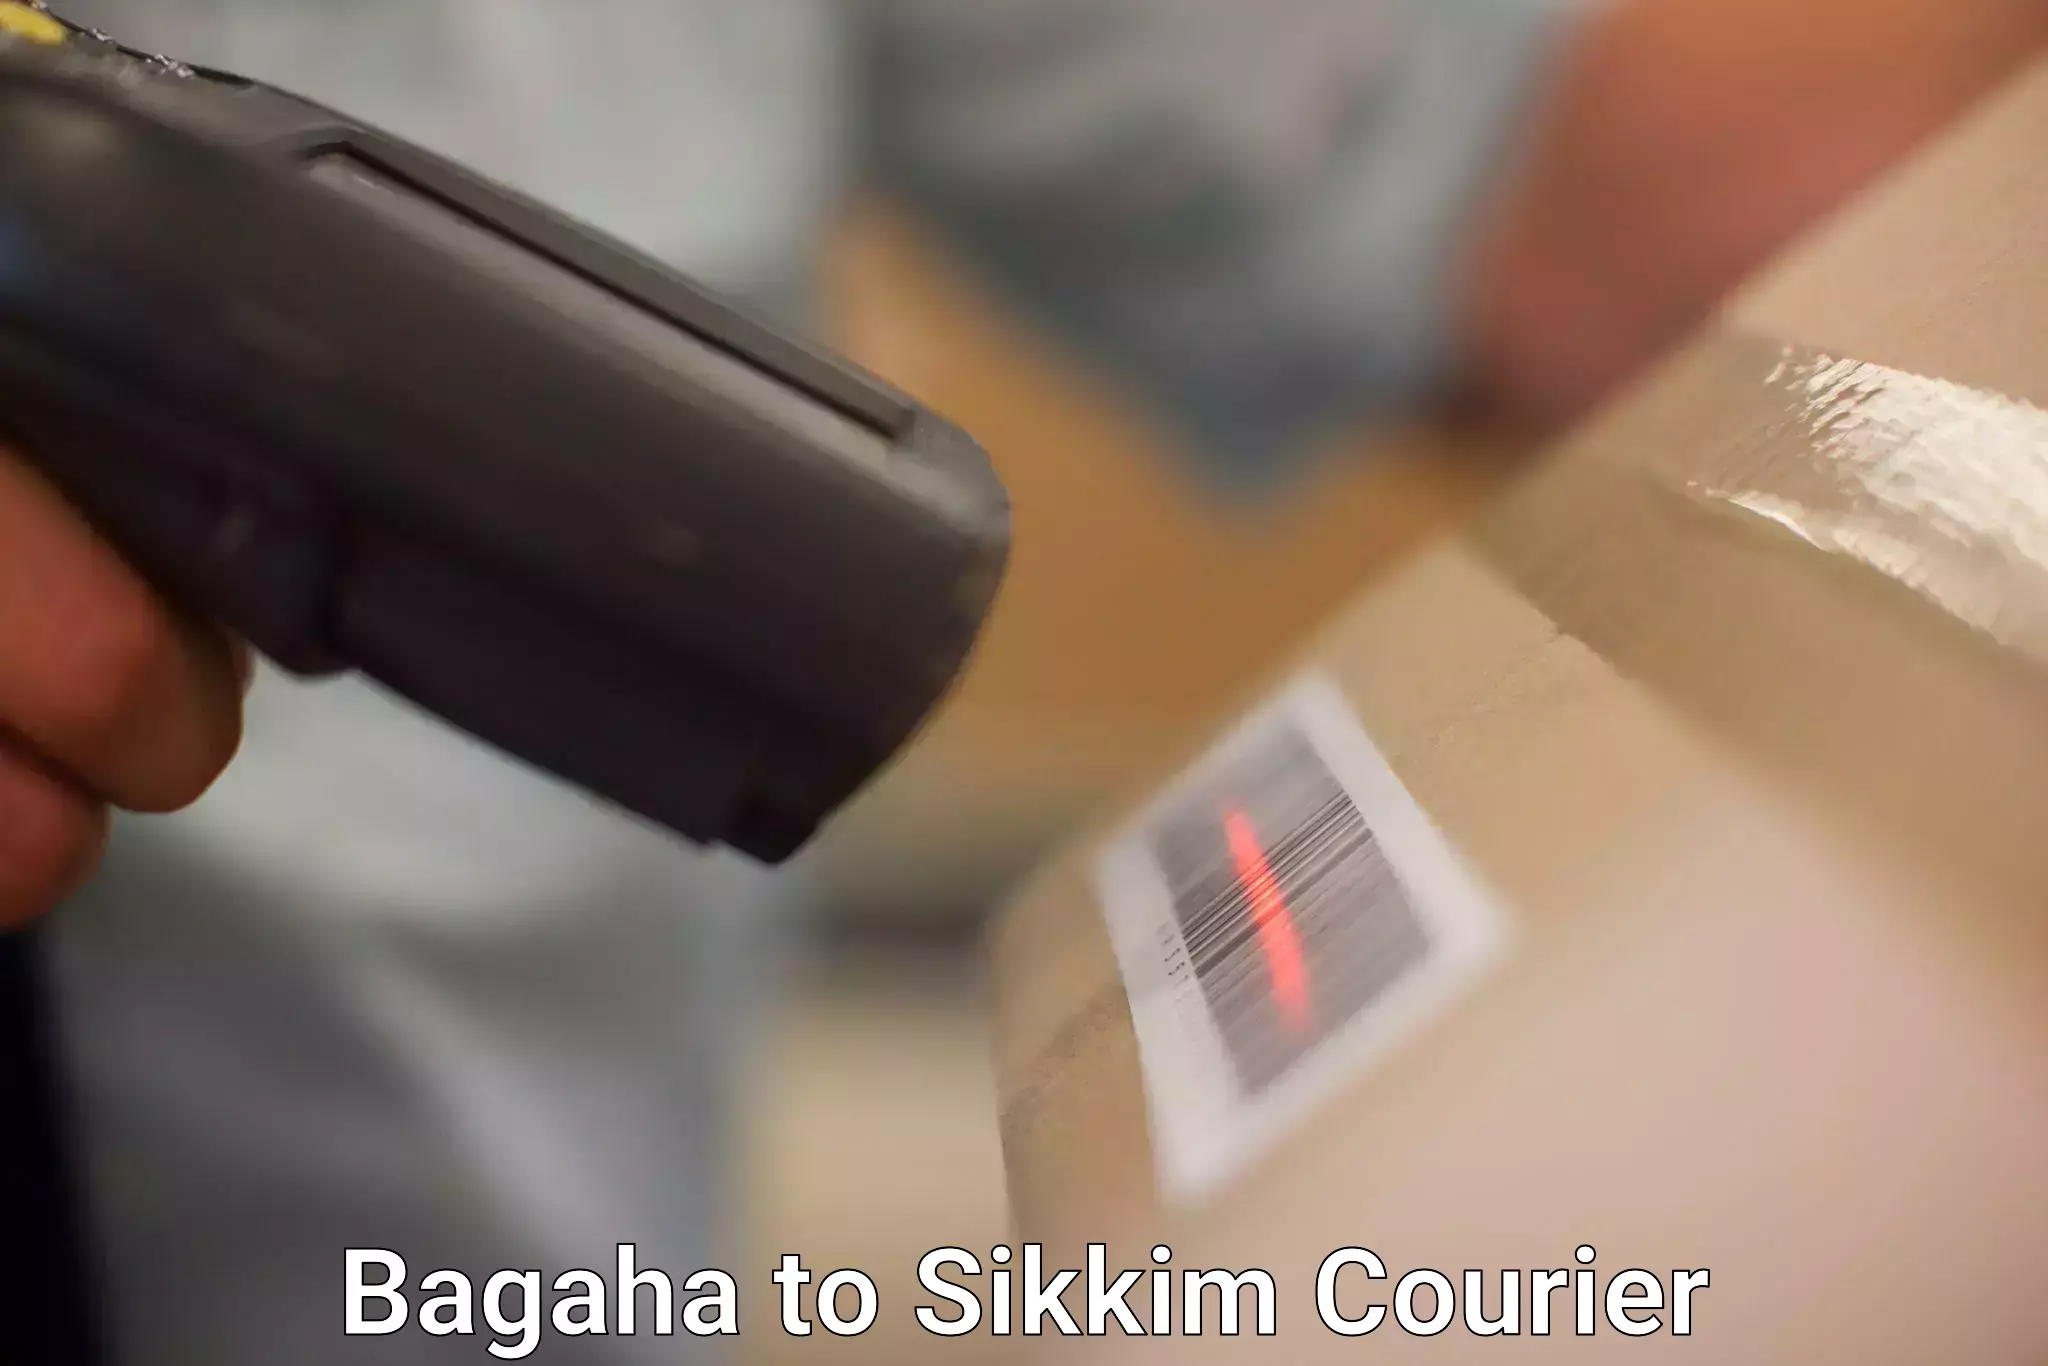 Smart shipping technology Bagaha to Pelling